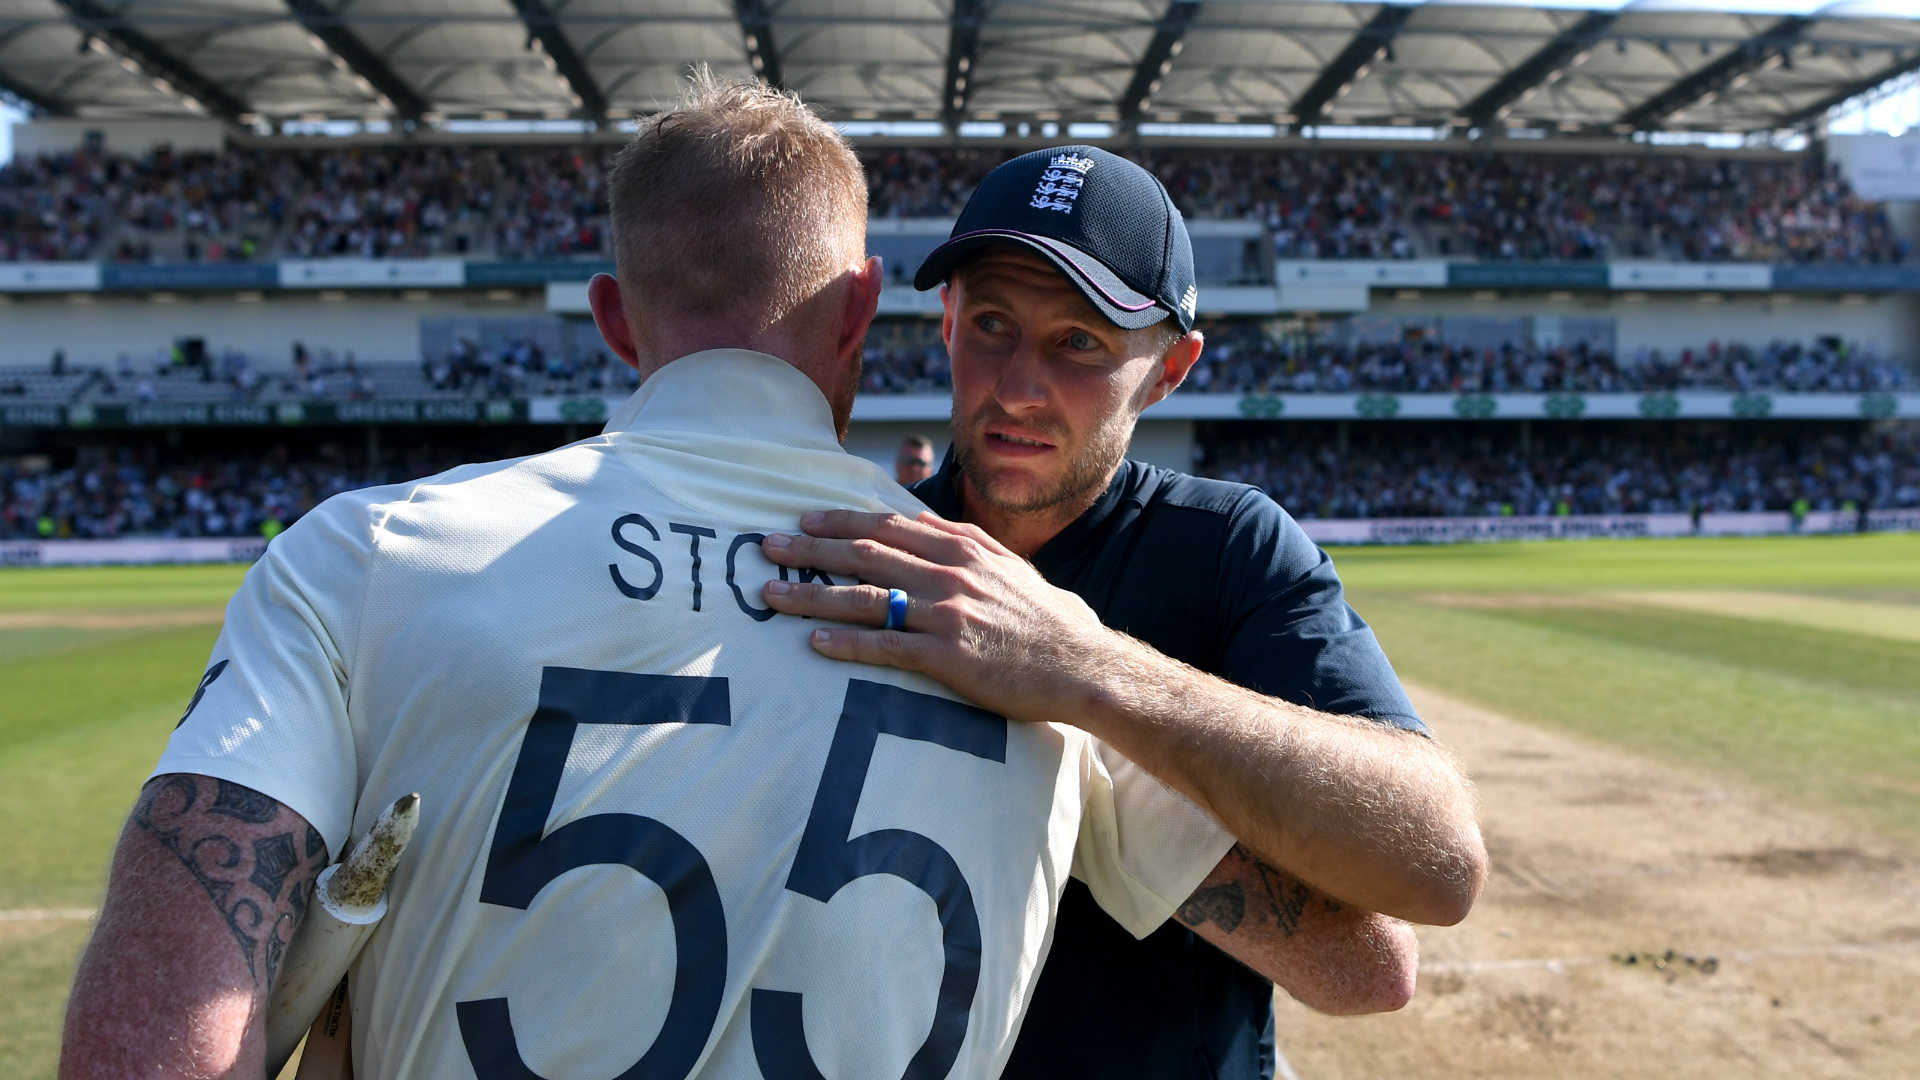 Ben Stokes must serve as an inspiration for the rest of the England team in the remaining two Ashes Tests, says captain Joe Root.